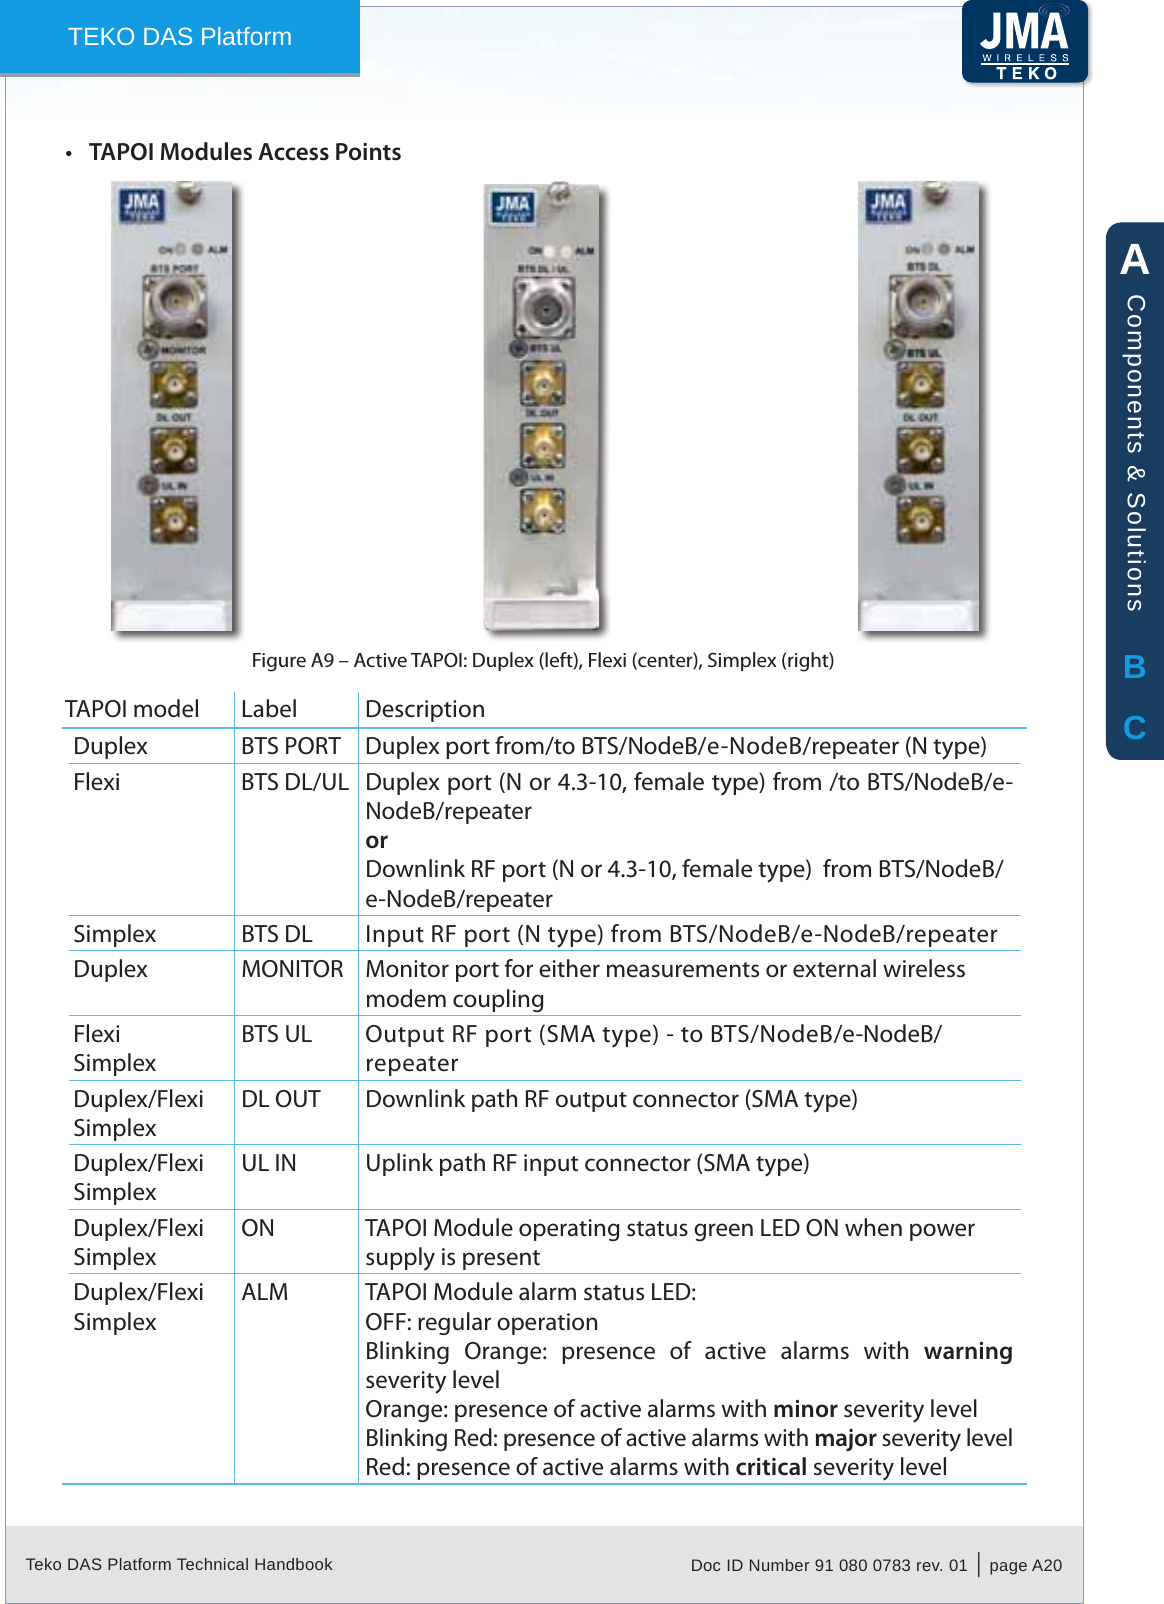 Teko DAS Platform Technical Handbook Doc ID Number 91 080 0783 rev. 01  |  page A20TEKO DAS PlatformTAPOI Modules Access Points•Active Figure A9 –  TAPOI: Duplex (left), Flexi (center), Simplex (right)TAPOI model Label DescriptionDuplex BTS PORT Duplex port from/to BTS/NodeB/e-NodeB/repeater (N type)Flexi BTS DL/UL Duplex port (N or 4.3-10, female type) from /to BTS/NodeB/e-NodeB/repeaterorDownlink RF port (N or 4.3-10, female type)  from BTS/NodeB/e-NodeB/repeaterSimplex BTS DL Input RF port (N type) from BTS/NodeB/e-NodeB/repeaterDuplex MONITOR Monitor port for either measurements or external wireless modem couplingFlexiSimplexBTS UL Output RF port (SMA type) - to BTS/NodeB/e-NodeB/repeaterDuplex/FlexiSimplexDL OUT Downlink path RF output connector (SMA type)Duplex/FlexiSimplexUL IN Uplink path RF input connector (SMA type)Duplex/FlexiSimplexON TAPOI Module operating status green LED ON when power supply is presentDuplex/FlexiSimplexALM TAPOI Module alarm status LED:OFF: regular operationBlinking  Orange:  presence  of  active  alarms  with  warning severity levelOrange: presence of active alarms with minor severity levelBlinking Red: presence of active alarms with major severity levelRed: presence of active alarms with critical severity levelABCComponents &amp; Solutions